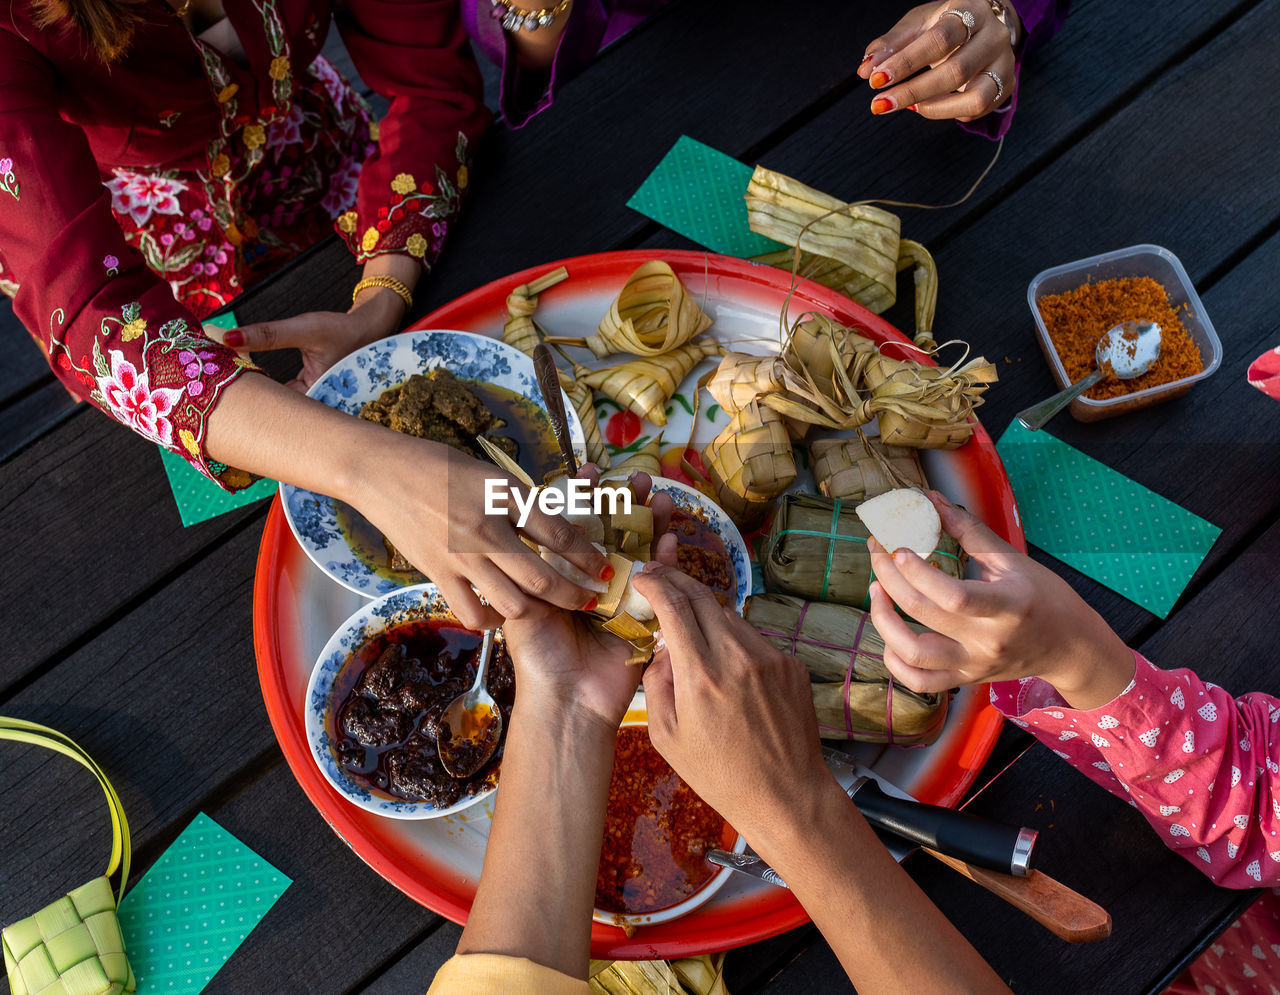 Top view of hands, muslim family, enjoying traditional malay cuisines on tray, at end of ramadan

